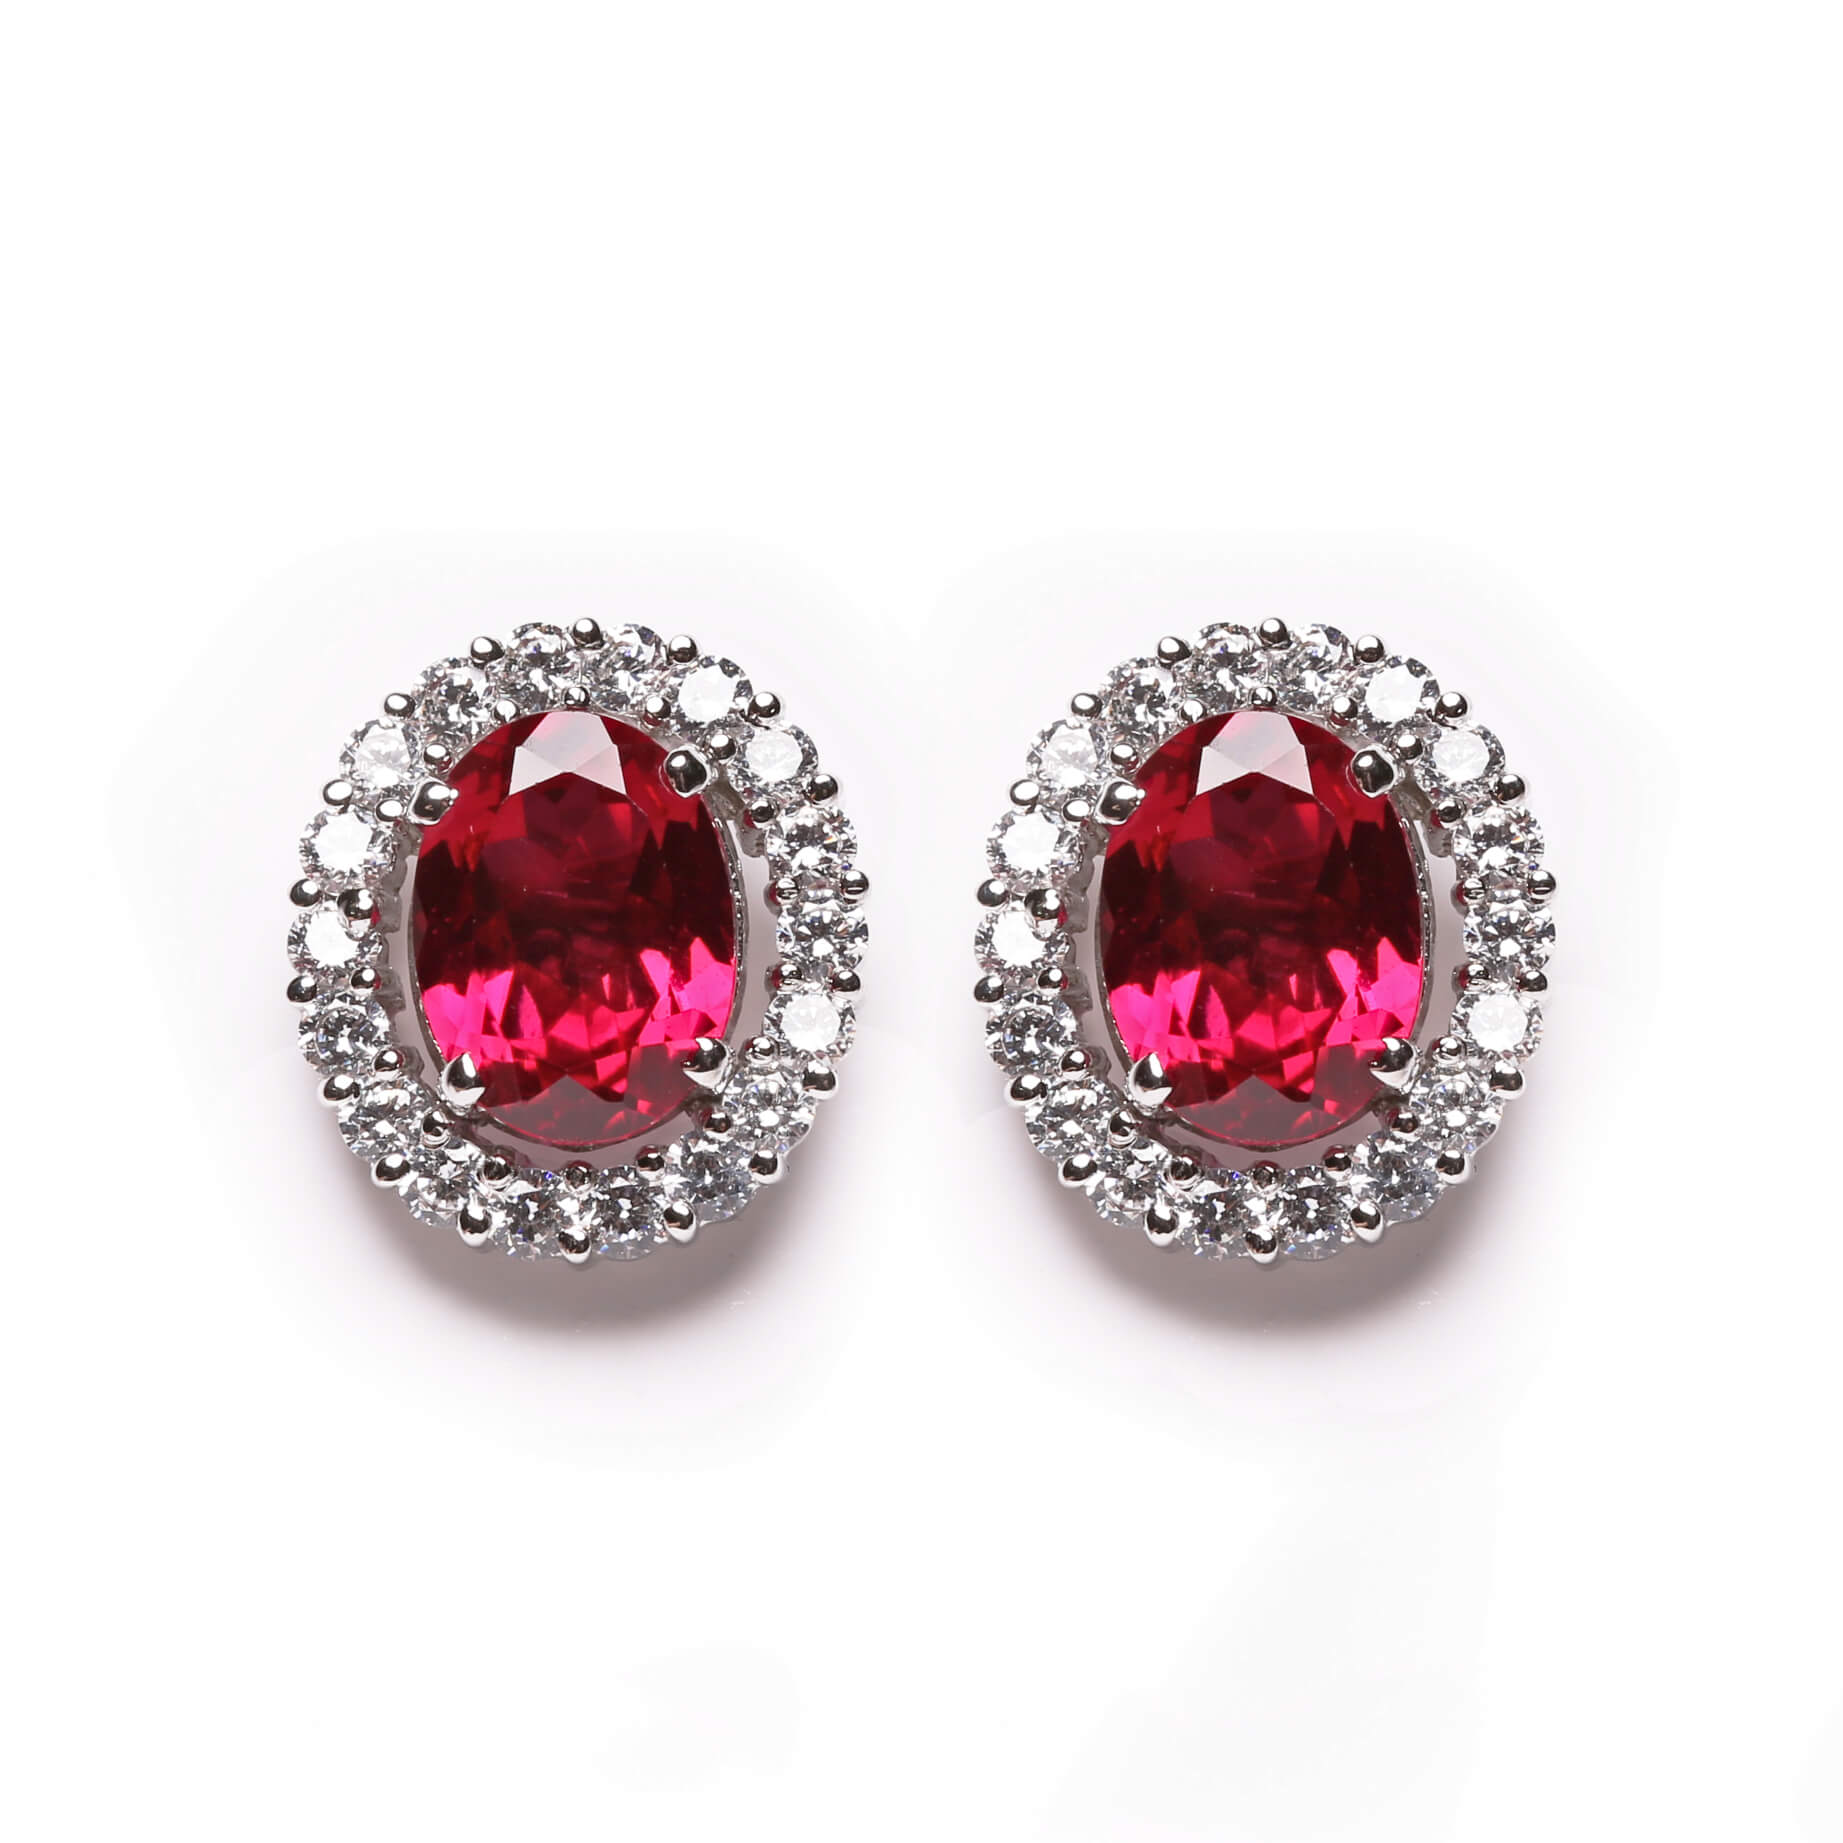 Discounted Deal With Ruby Gold Polish Stud Earrings